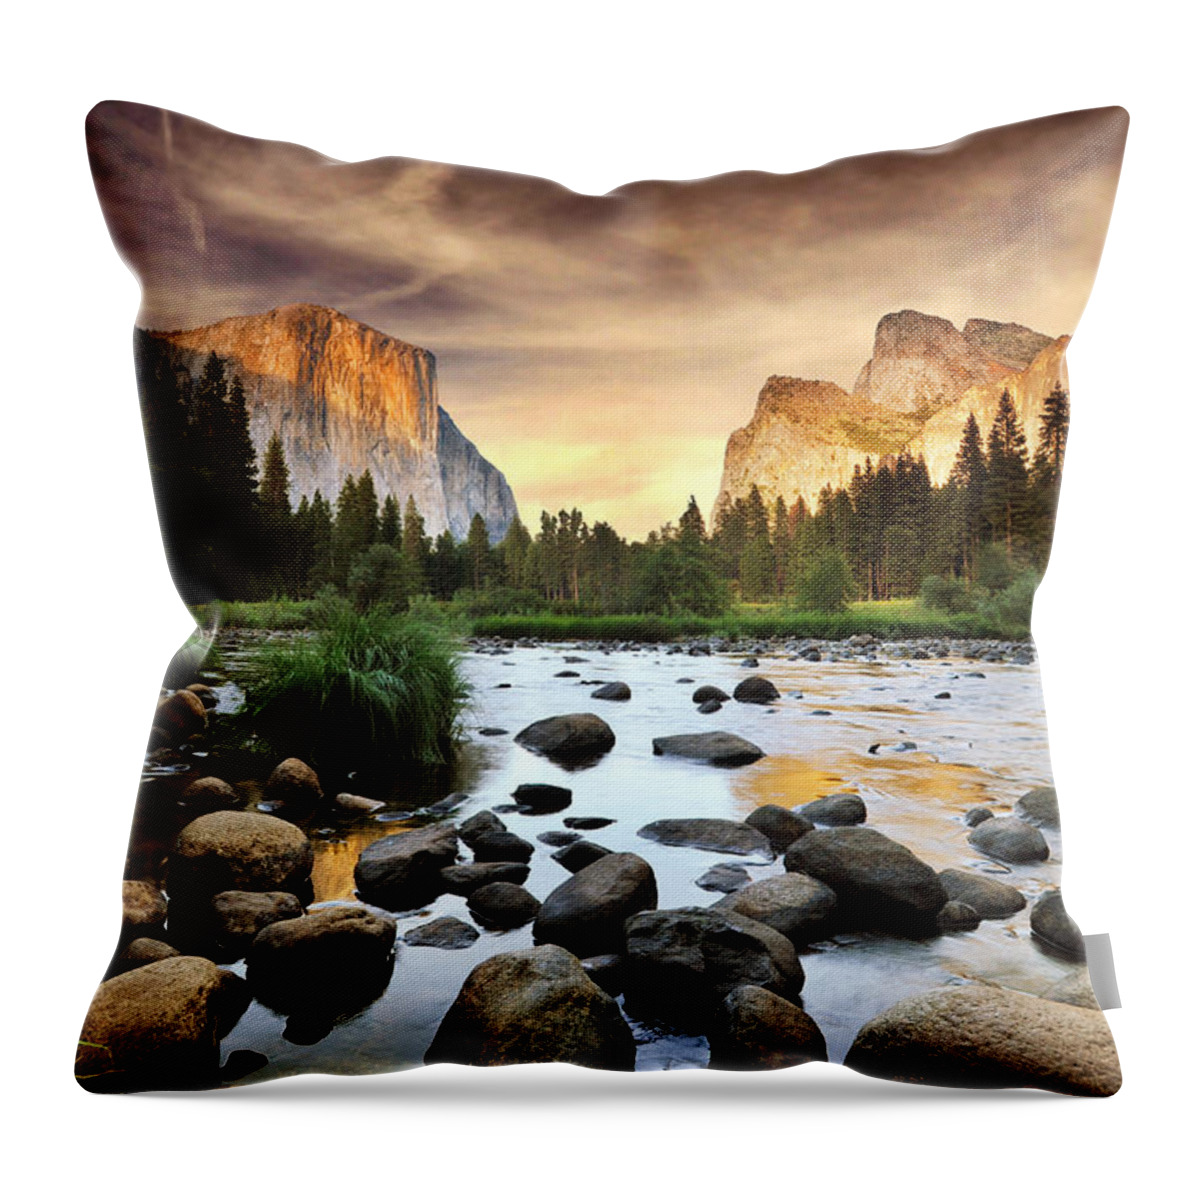 Scenics Throw Pillow featuring the photograph Valley Of Gods by John B. Mueller Photography